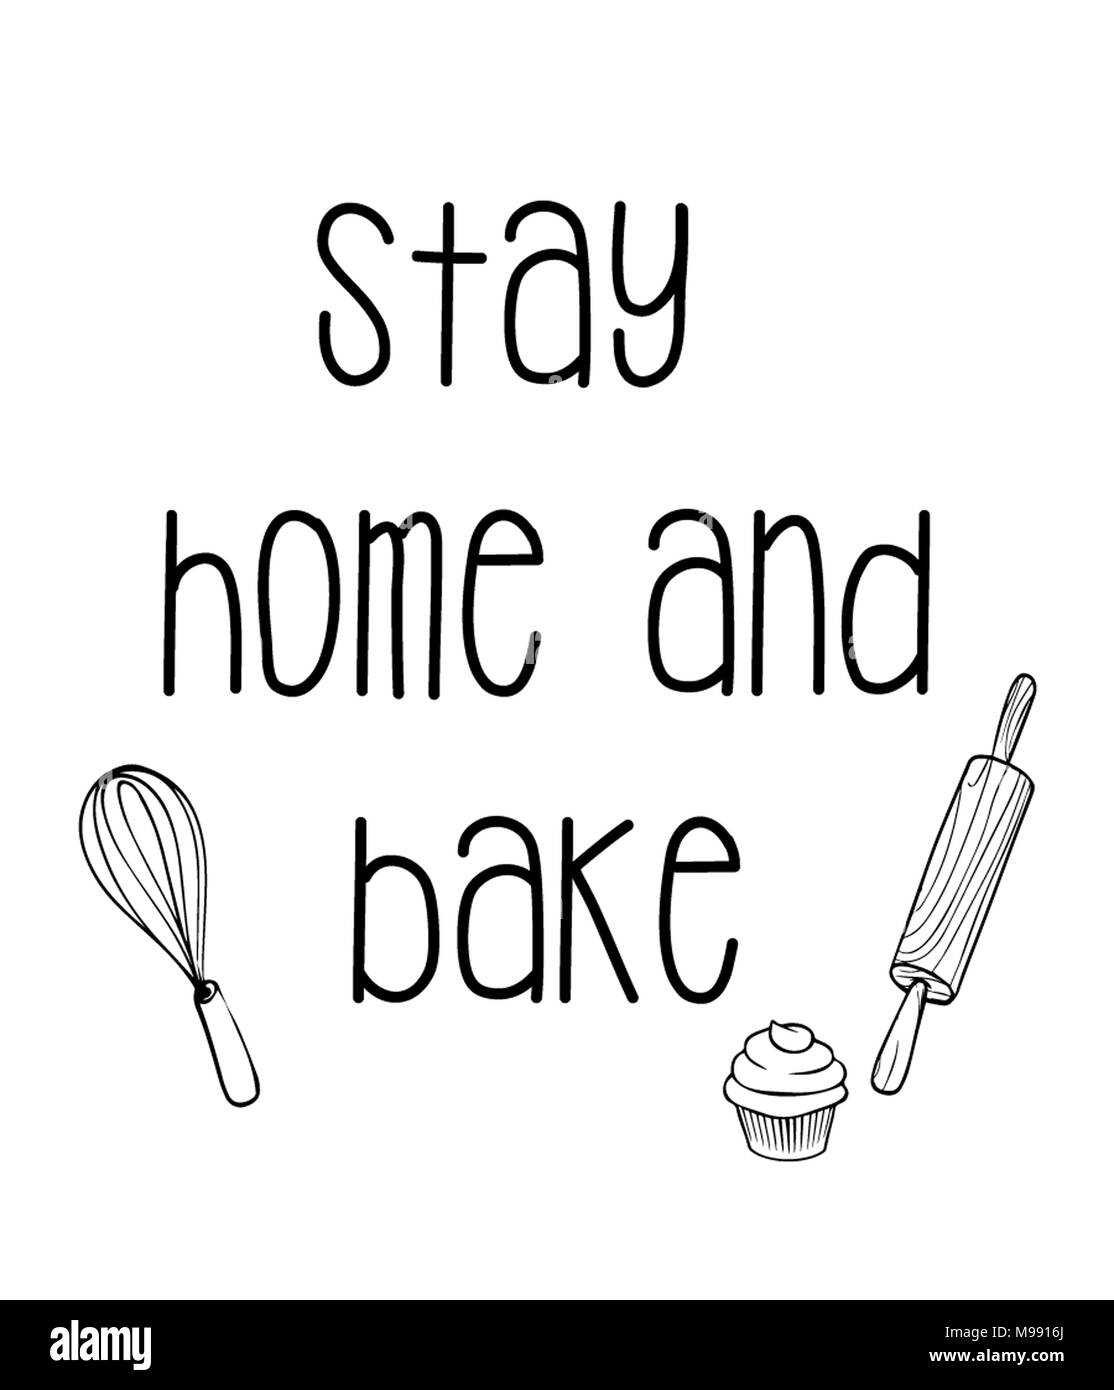 stay home and bake Stock Photo